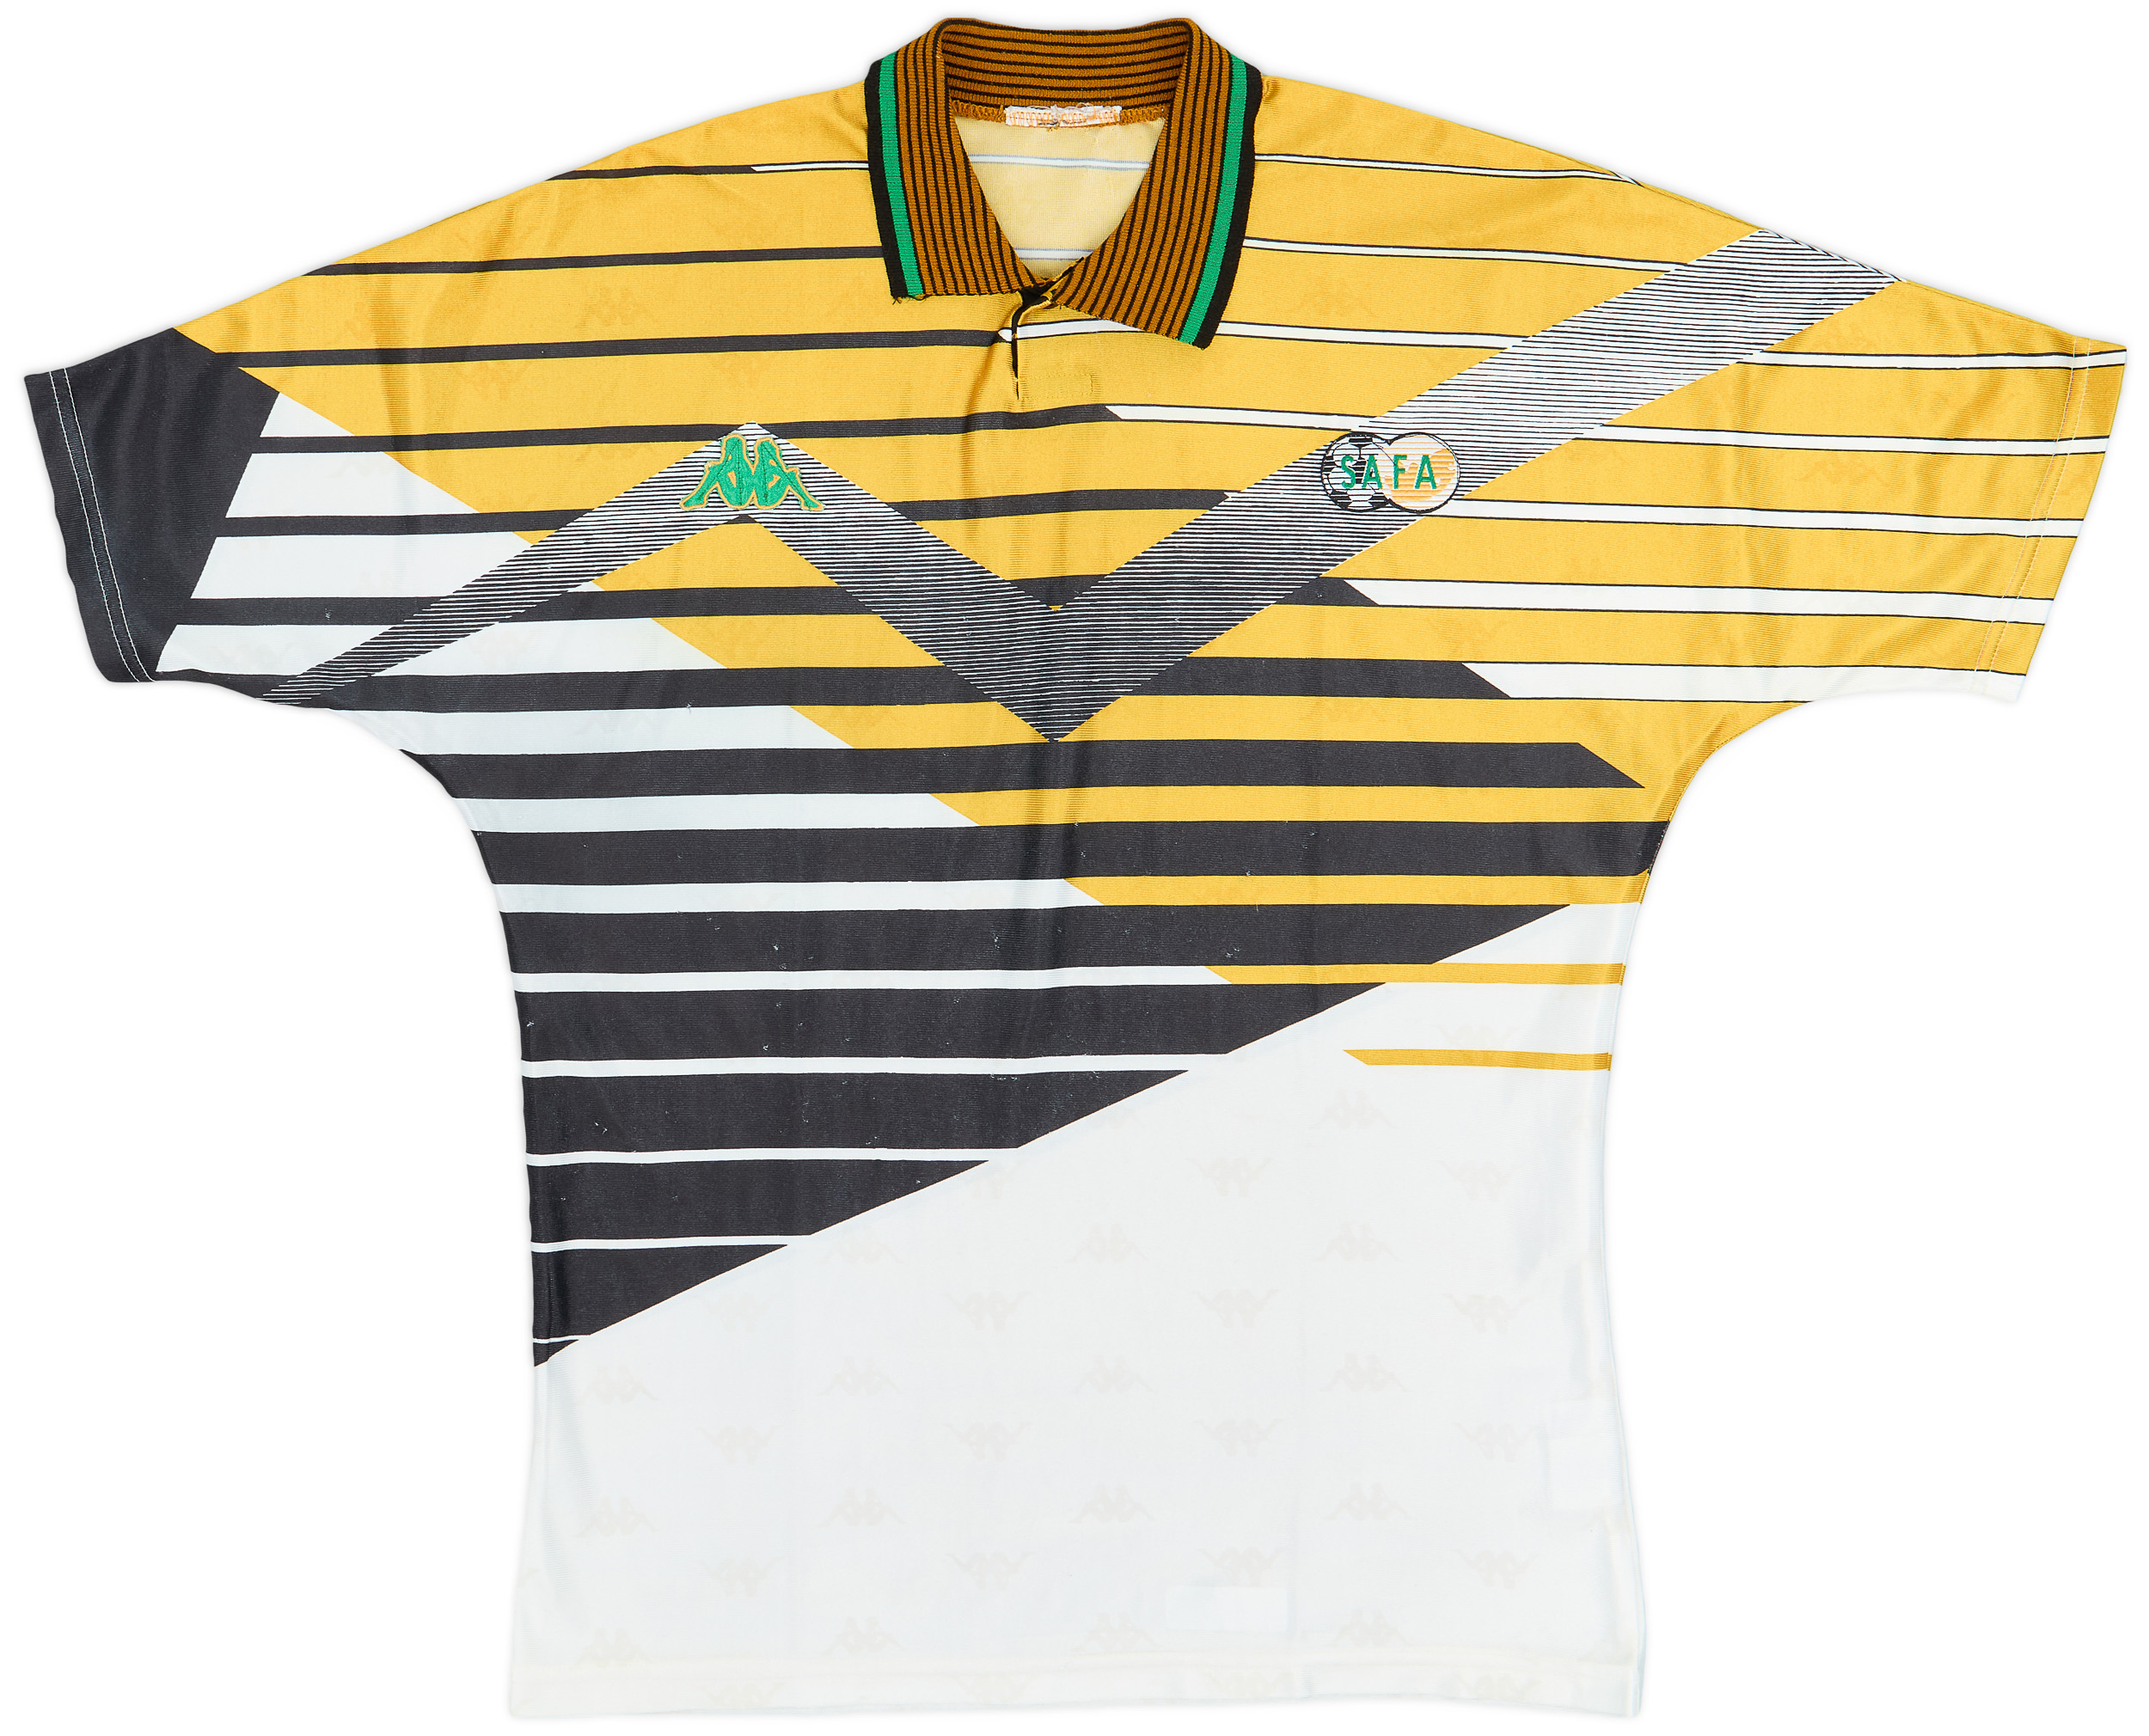 1996-98 South Africa Home Shirt - 8/10 - ()